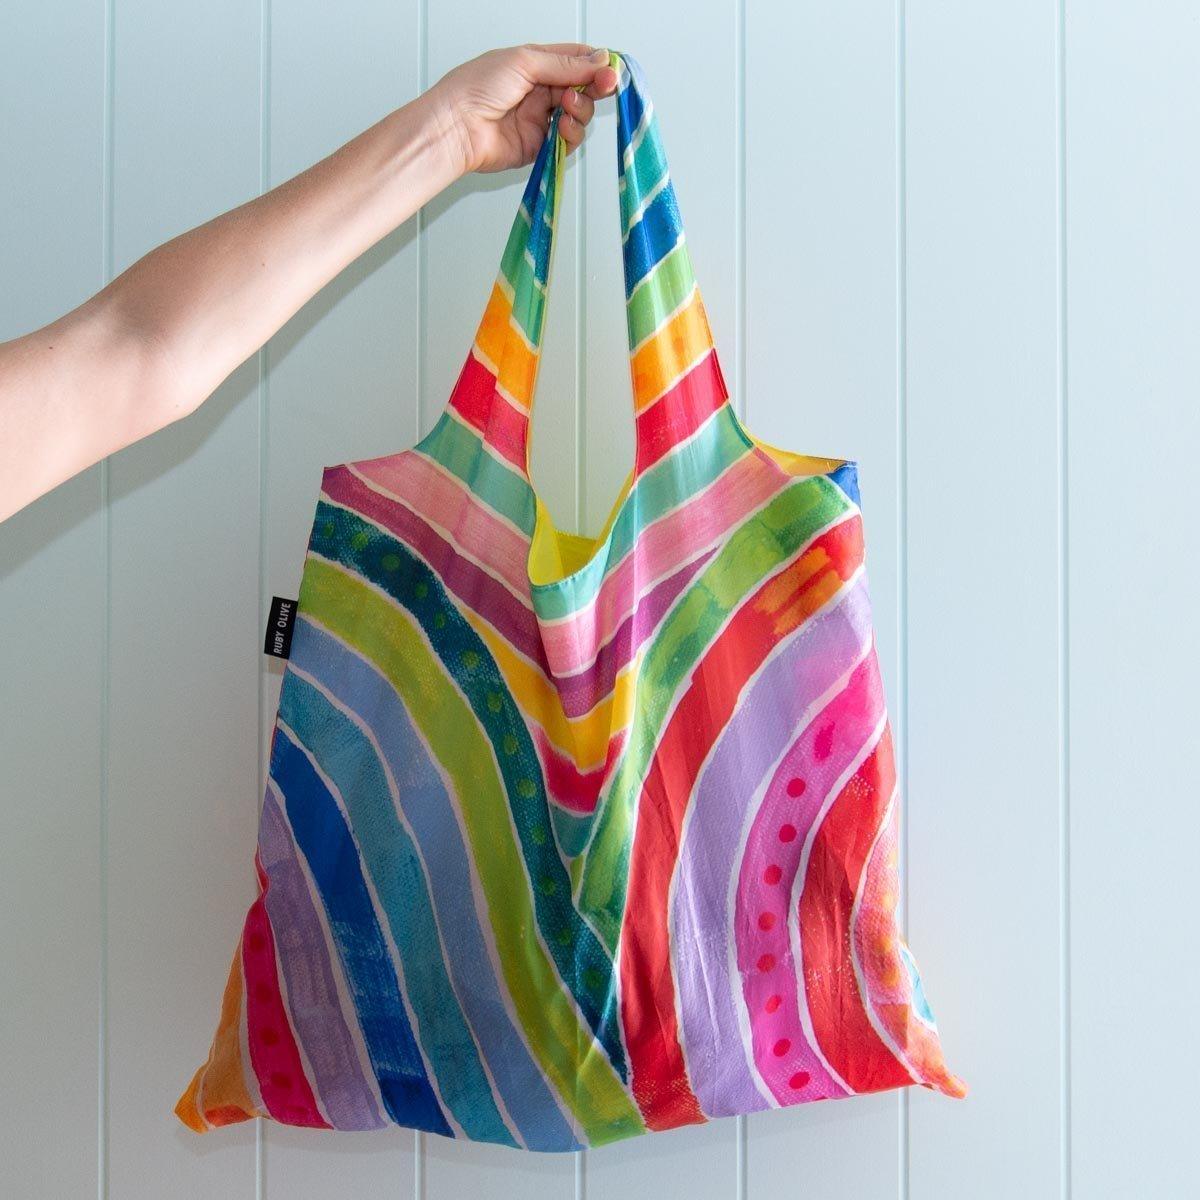 Load image into Gallery viewer, RUBY OLIVE x Lordy Dordie Rainbows Shopper Bag - Lordy Dordie Art
